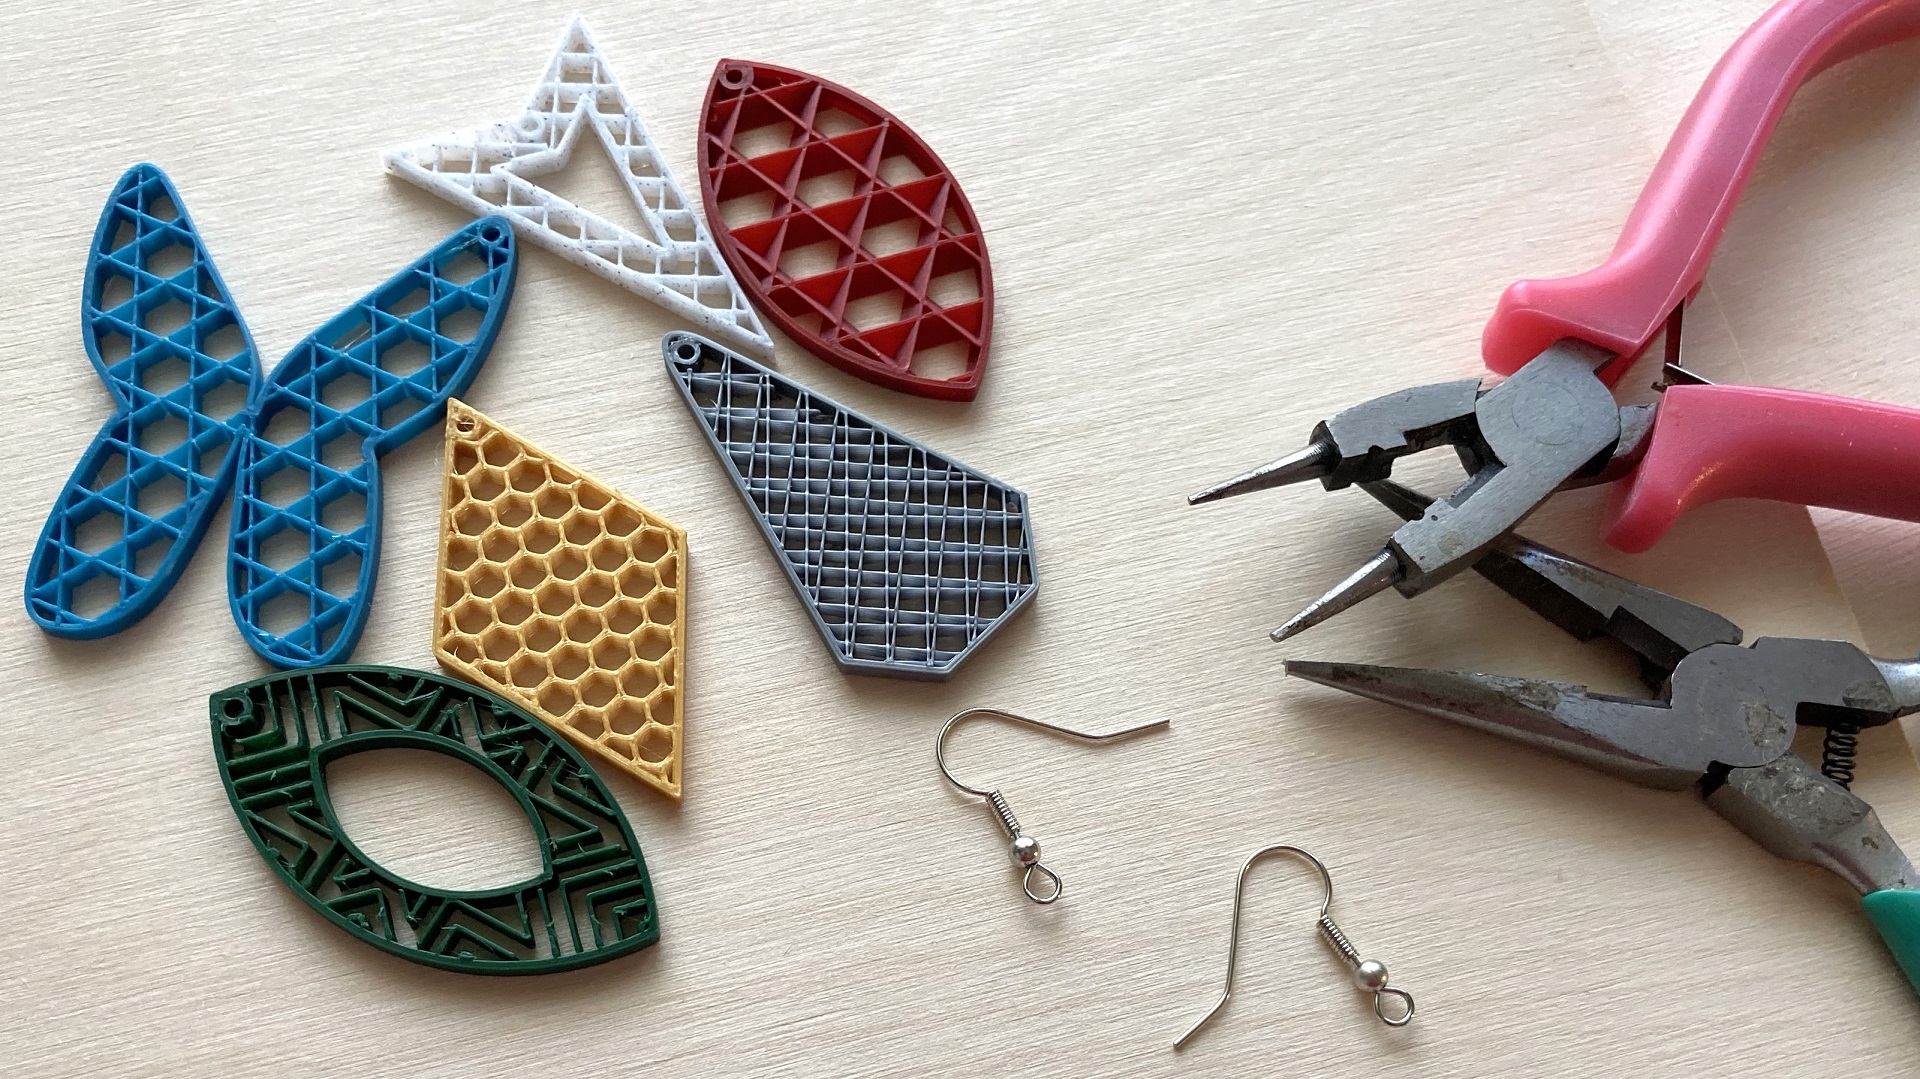 3D Printed Math Art: 10+ Amazing Projects